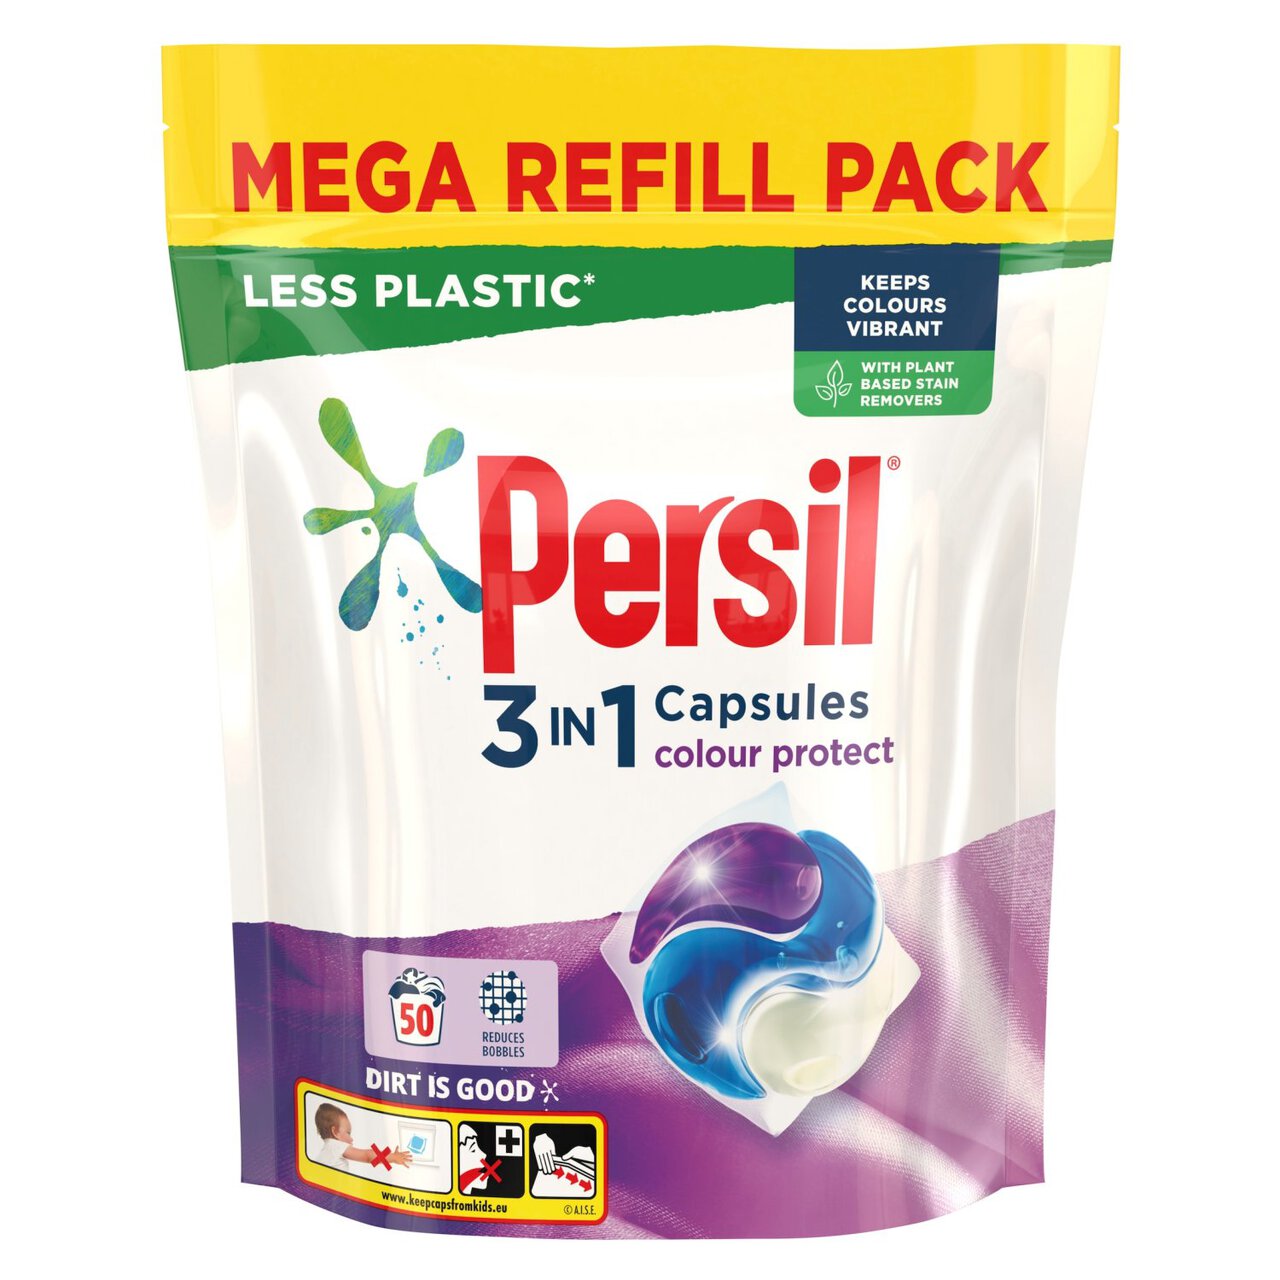 Persil 3 in 1 Laundry Washing Capsules Colour Protect 50 Wash 50 per pack